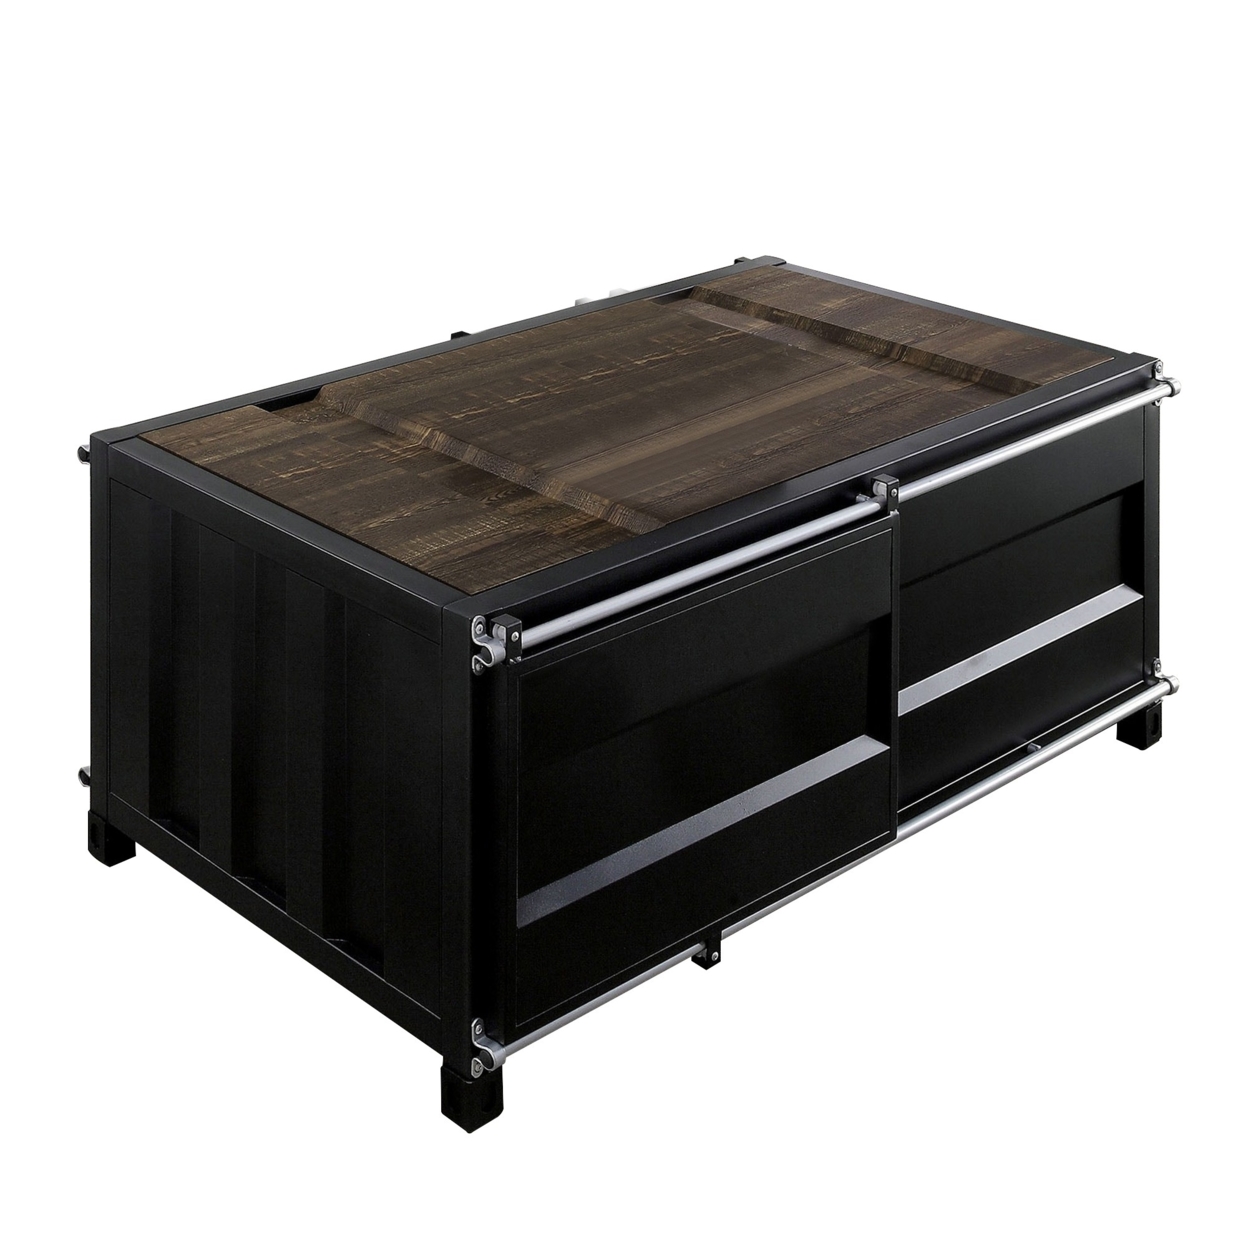 Container Style Coffee Table With Sliding Doors, Black- Saltoro Sherpi